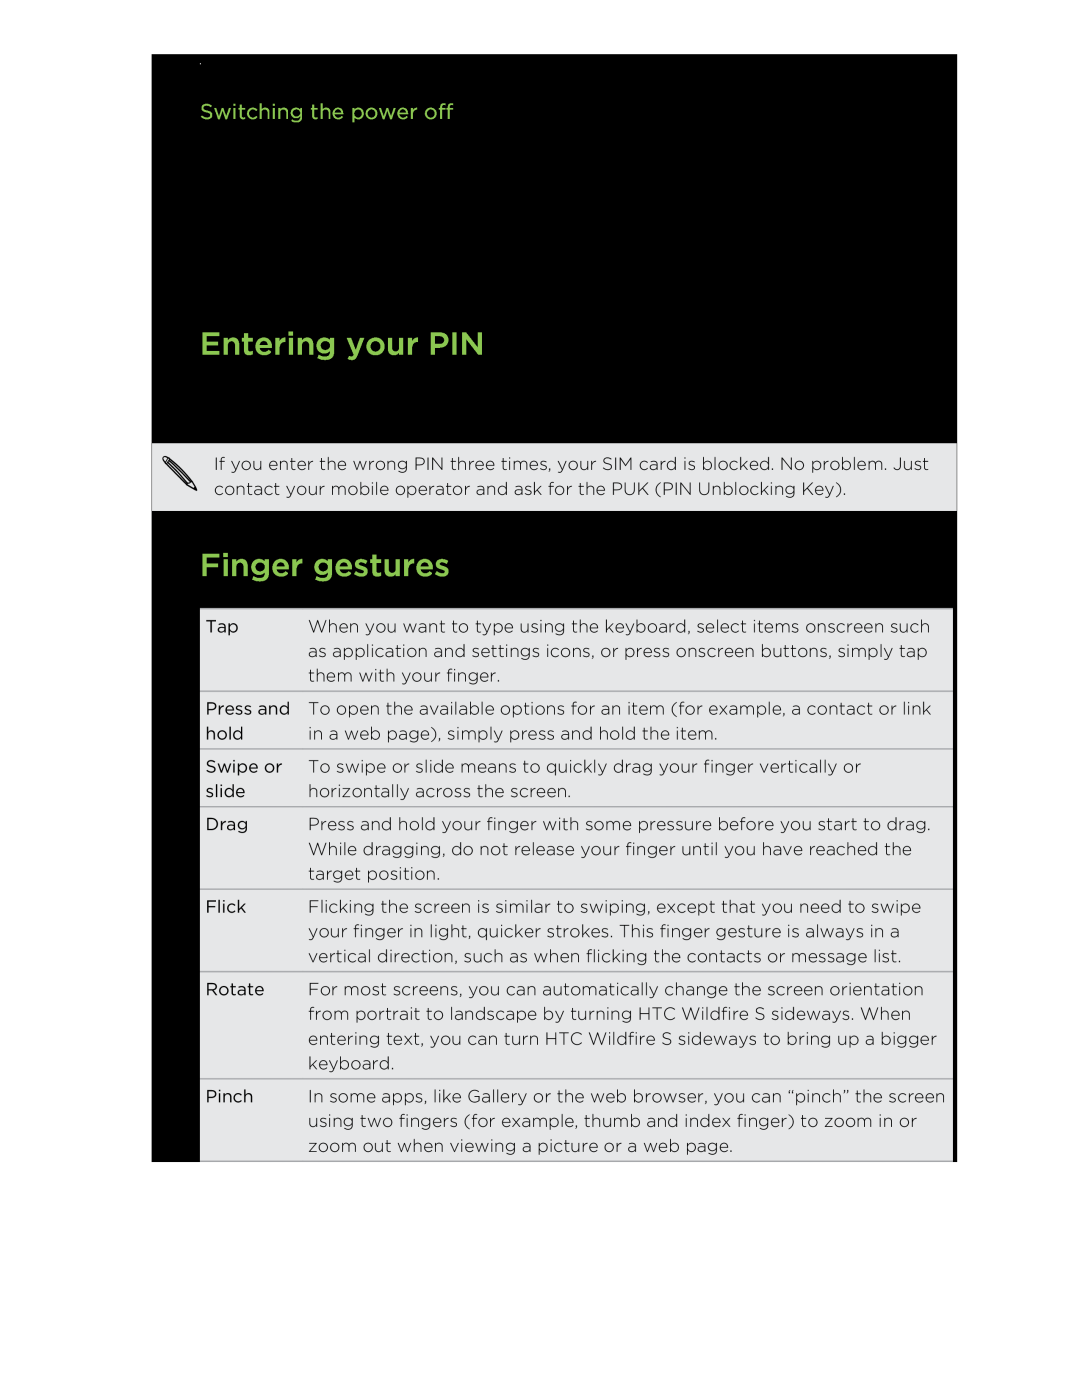 HTC manual Entering your PIN, Finger gestures, Switching the power off 